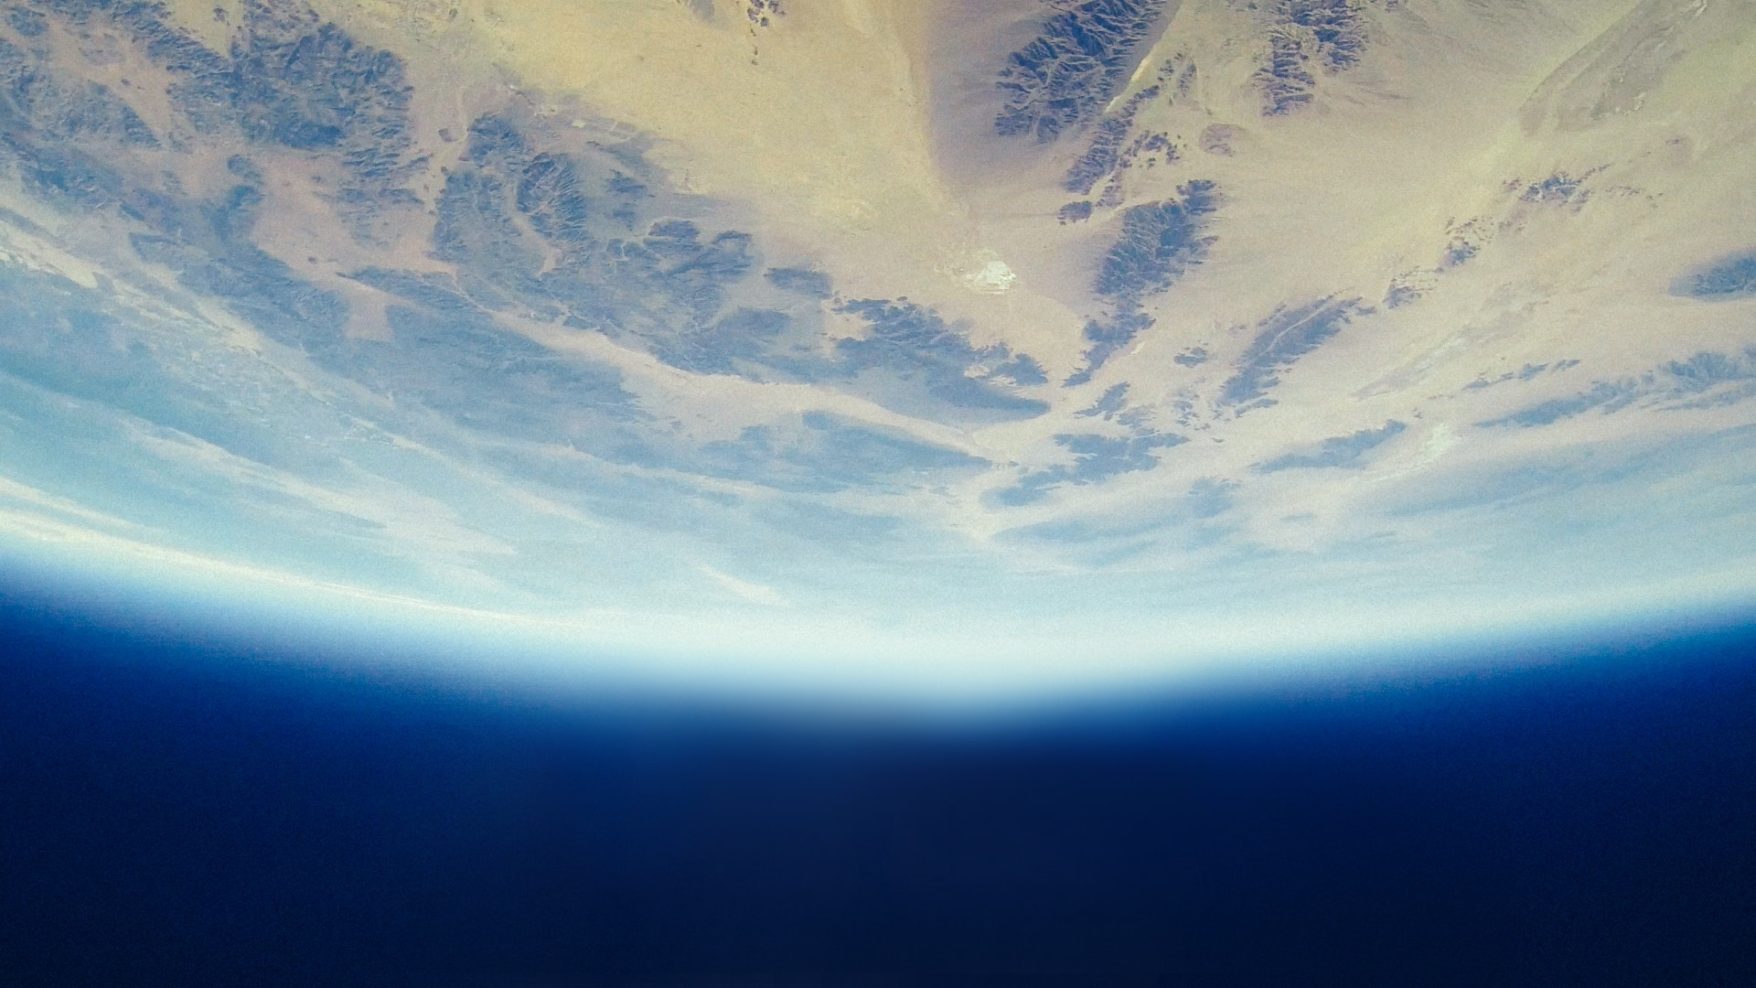 Photograph Earth's atmosphere and landscape from space